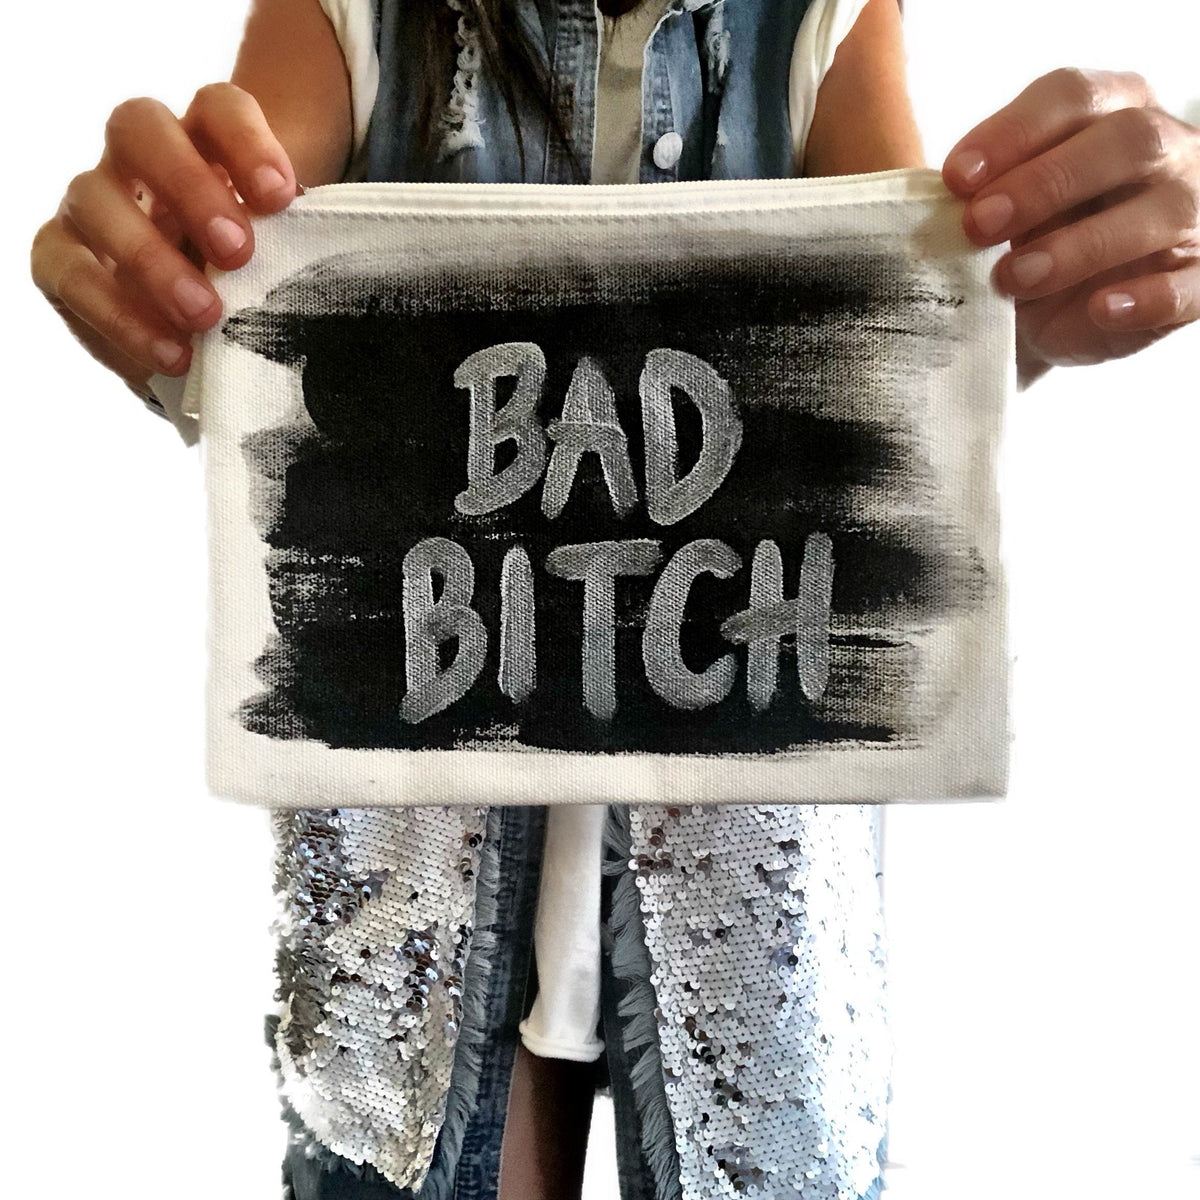 White denim zippered pouch Hand painted 'Bad Bitch' on one side, crossbones on the other.